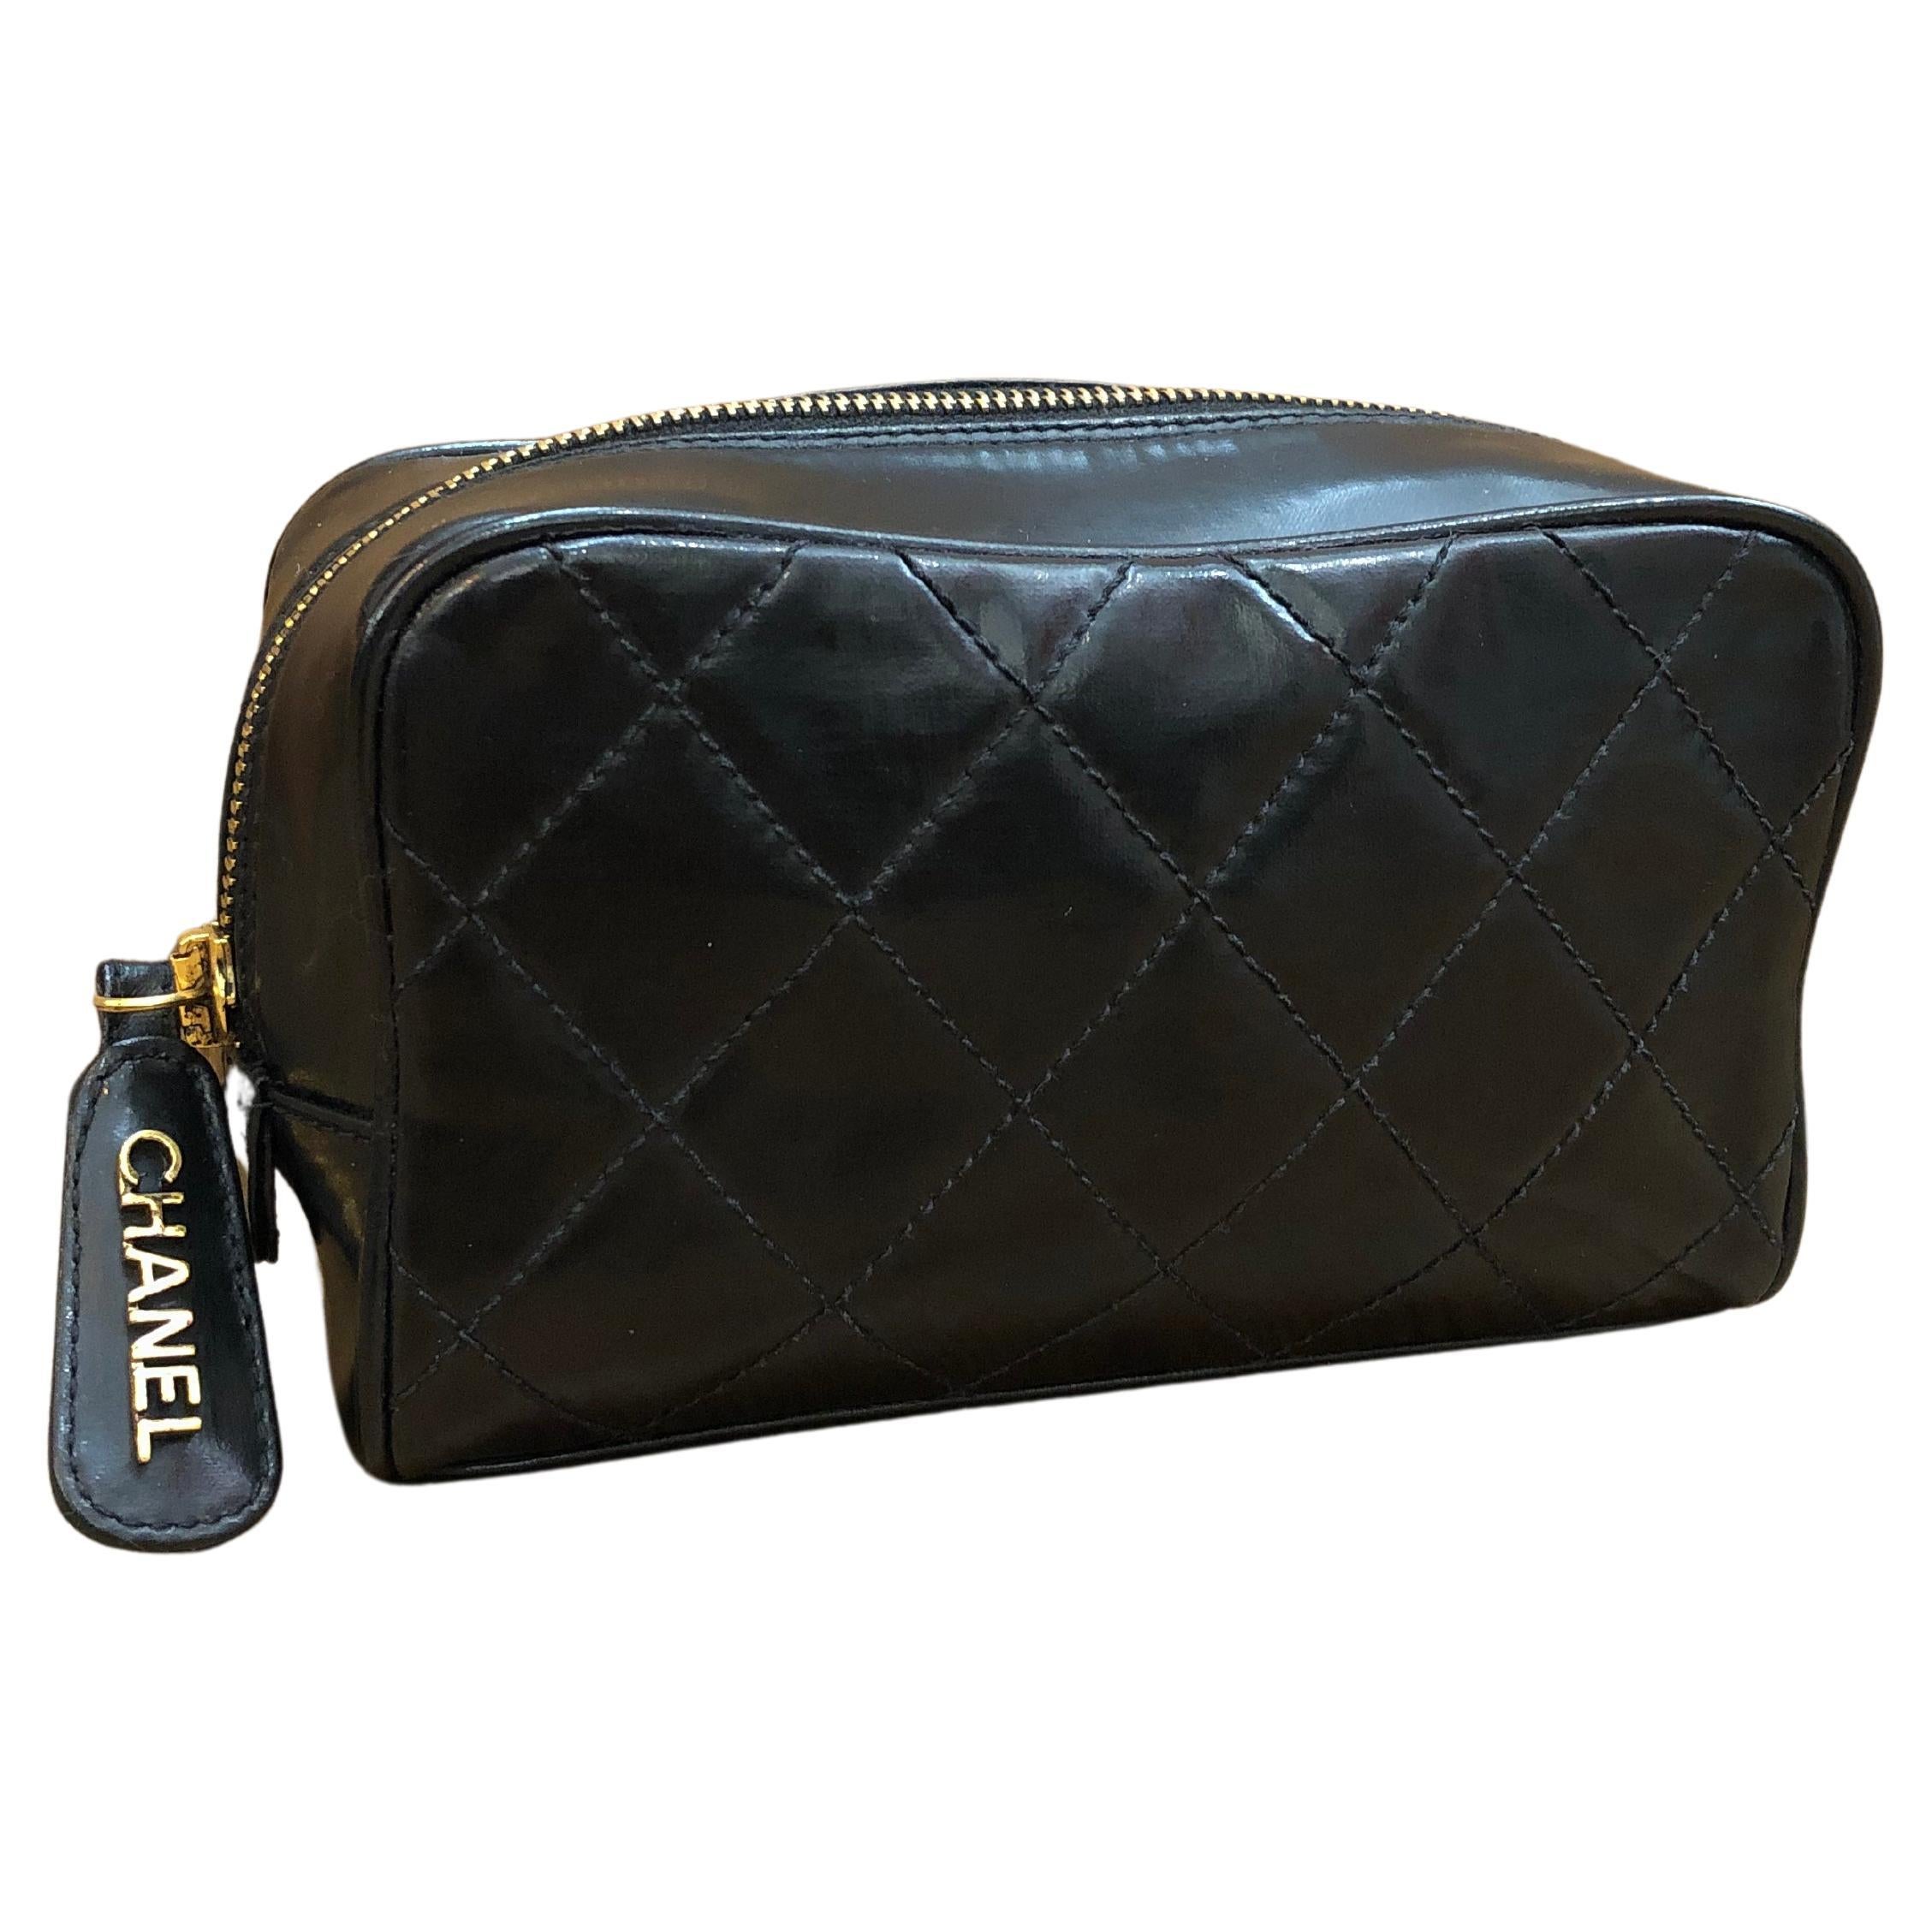 Louis Vuitton Black Epi Leather Small Cosmetic Pouch-Crossbody 6.5in x 4in  x 2.5